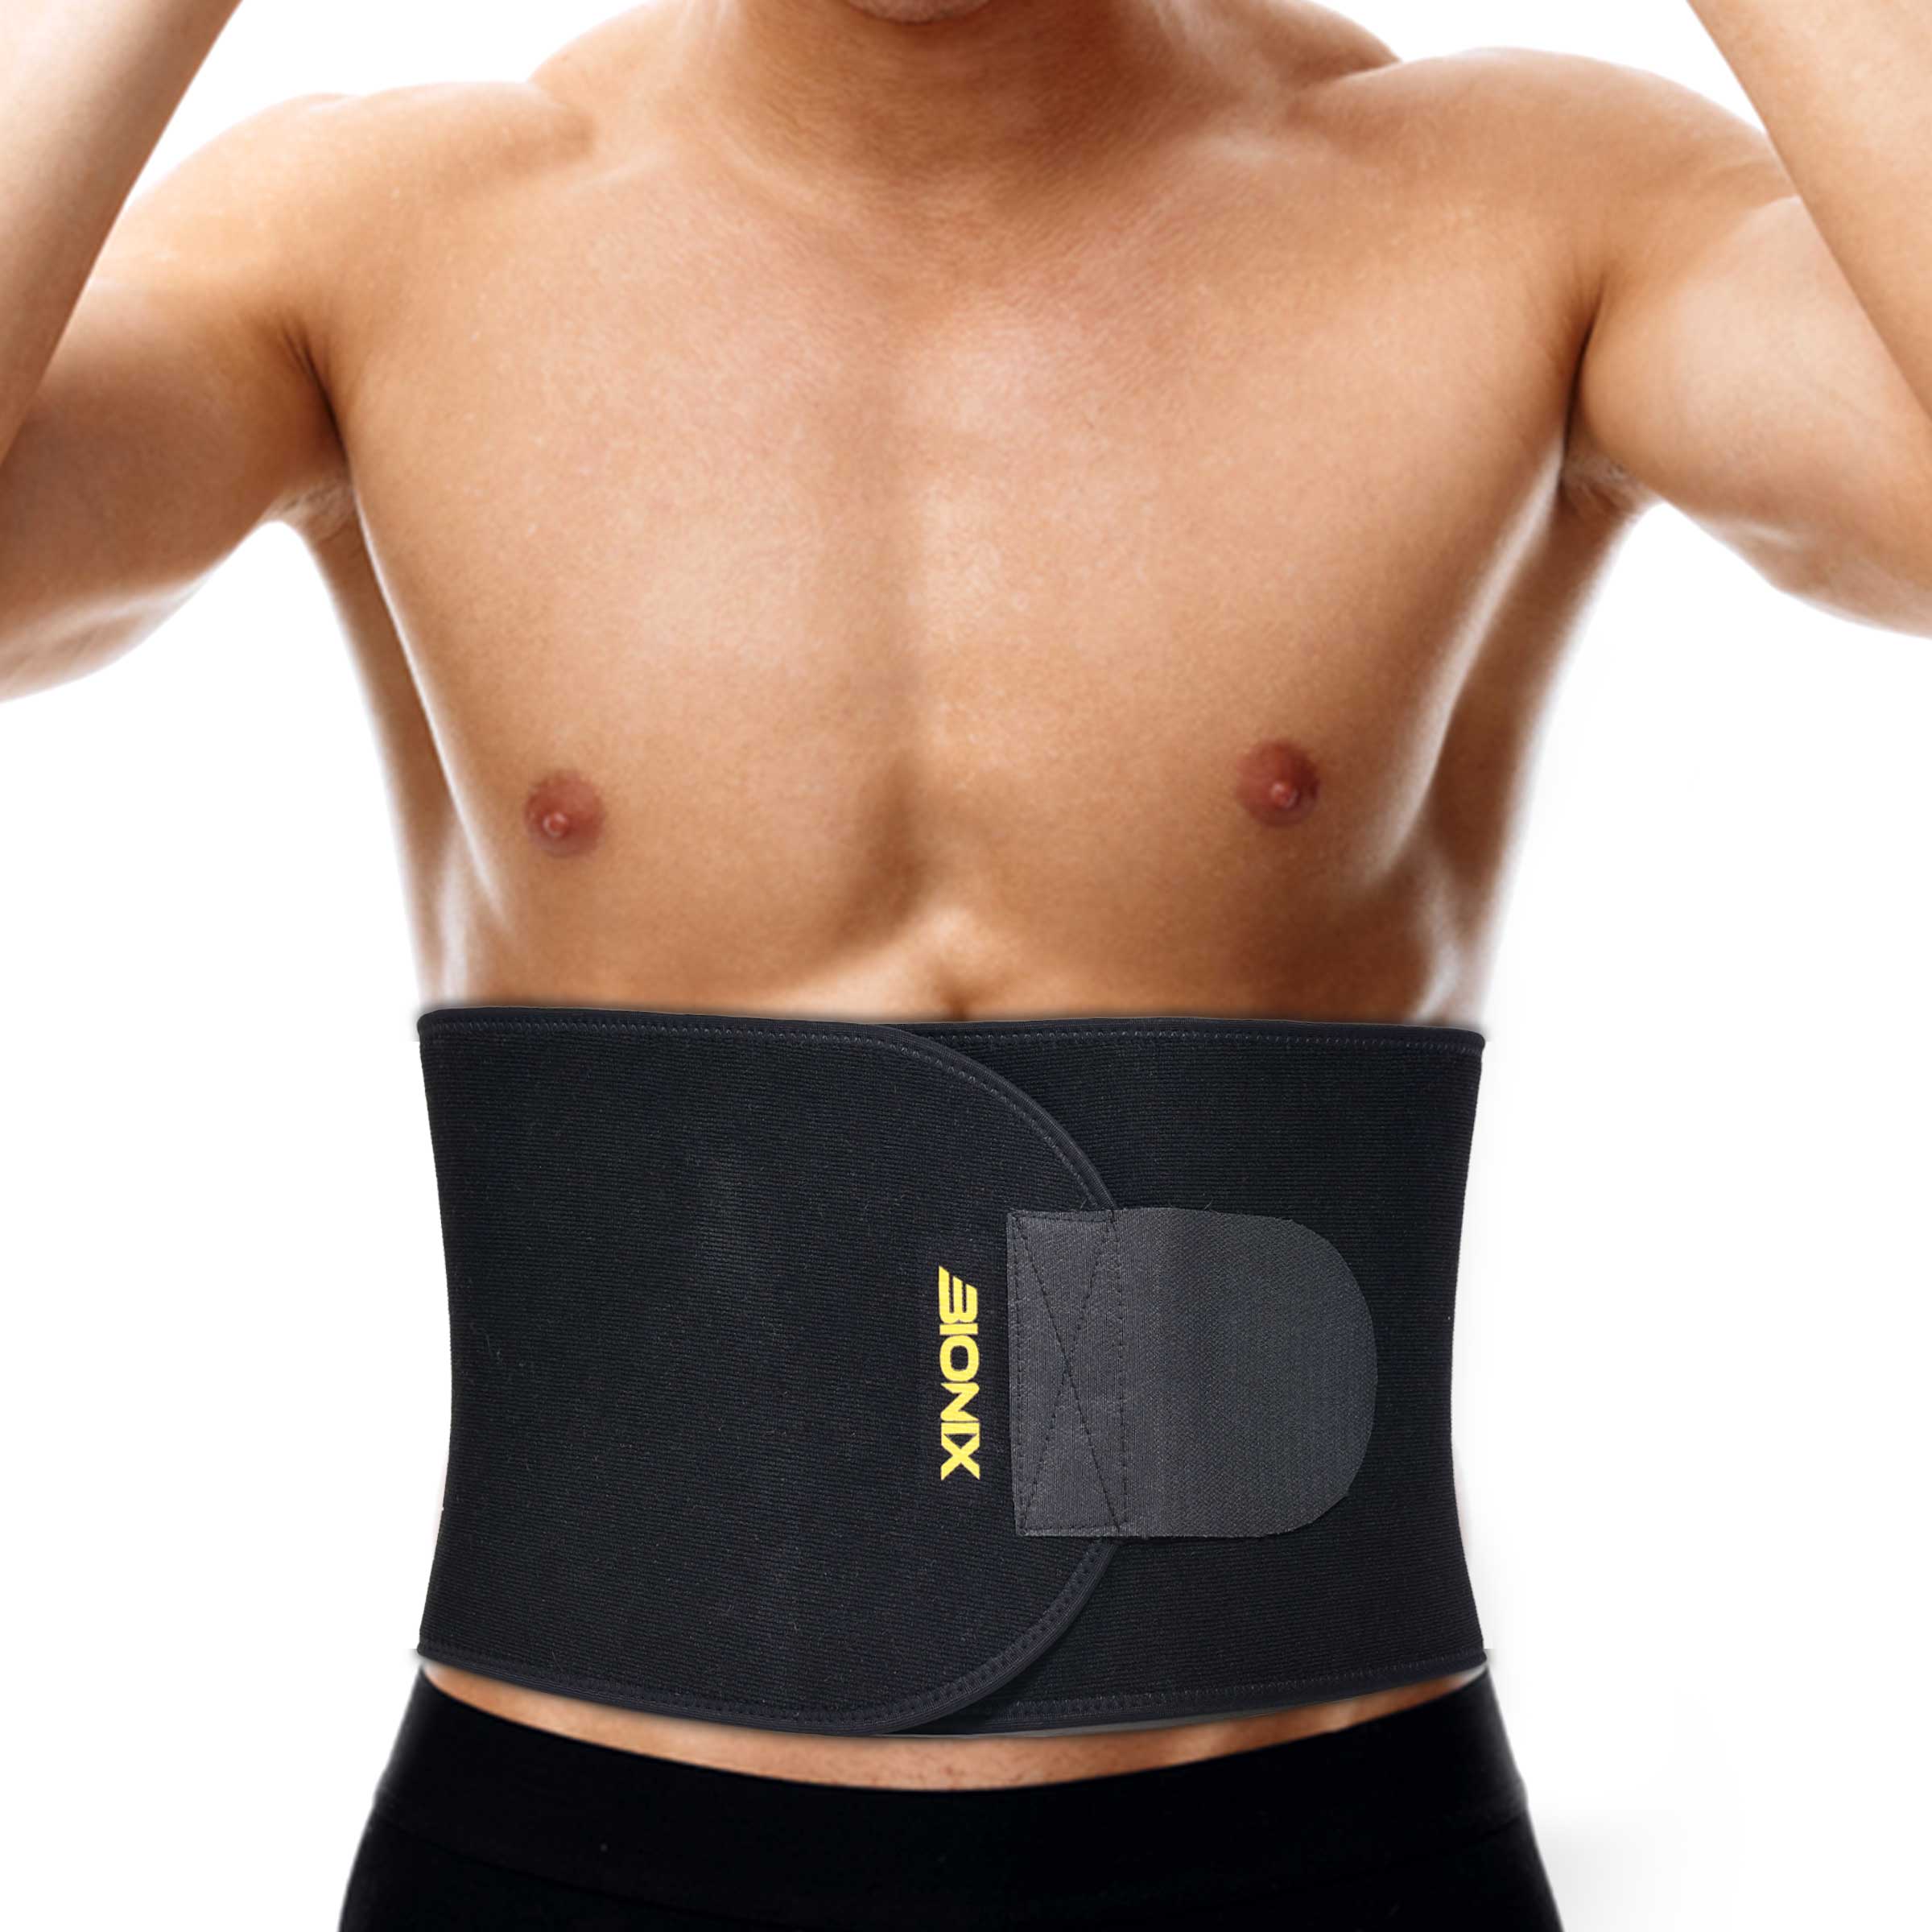 Buy XIANCO Tummy Trimmer With Sweat Slim Belt A Complete Slimming